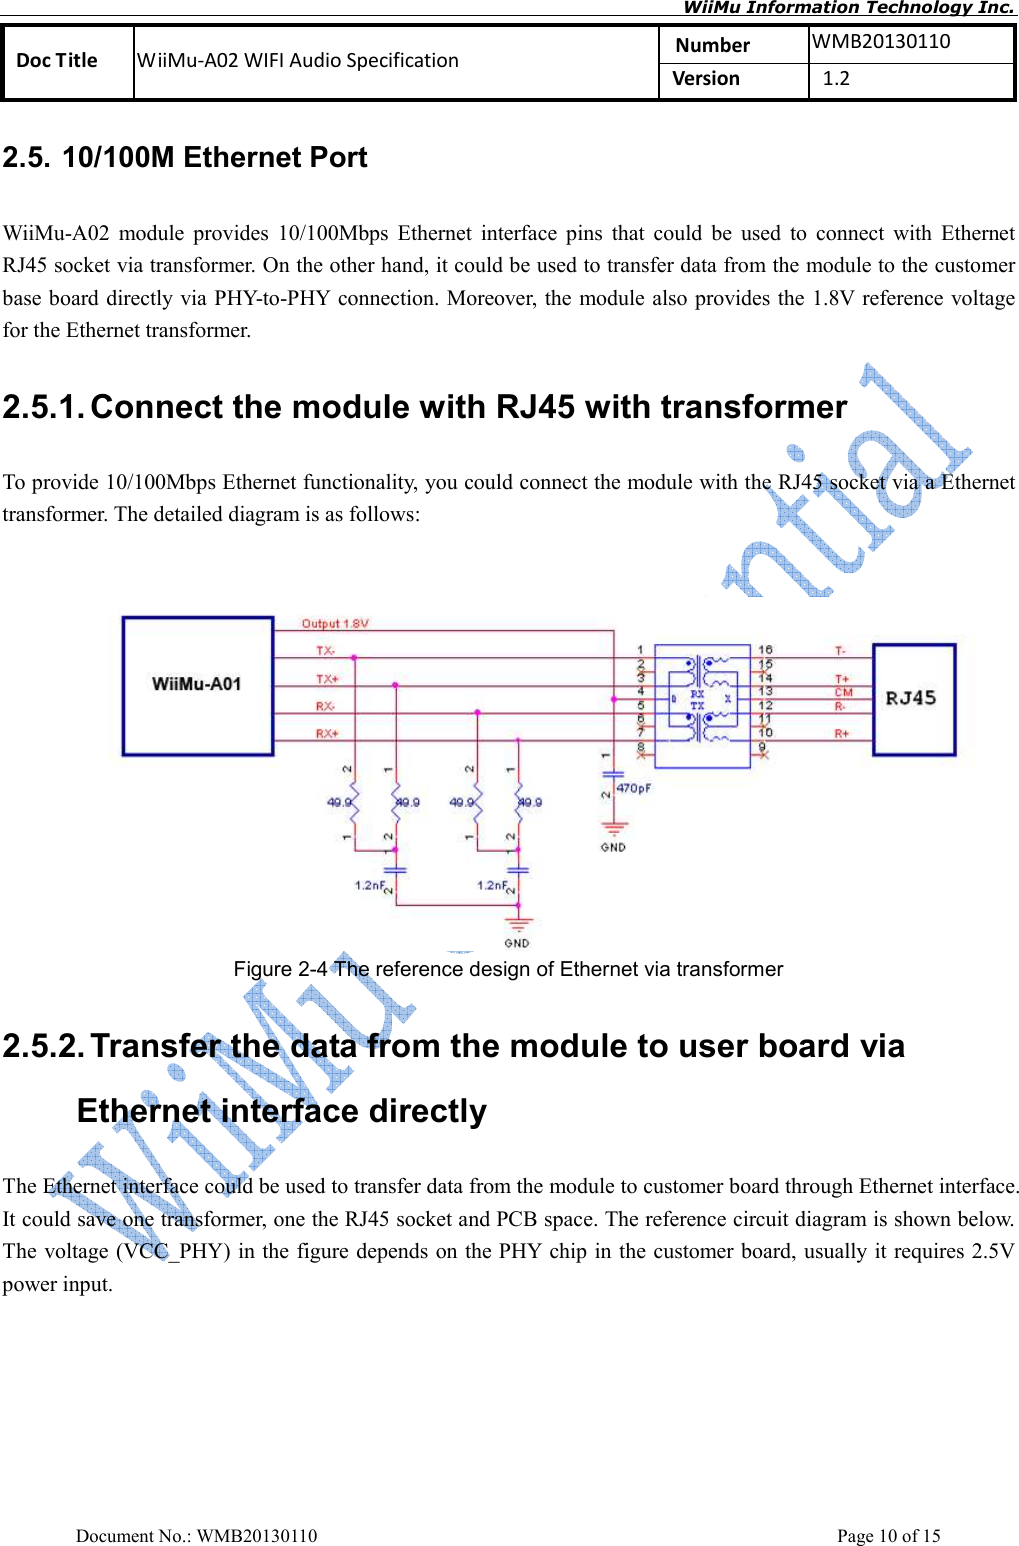       WiiMu Information Technology Inc. Number  WMB20130110 Doc Title  WiiMu-A02 WIFI Audio Specification  Version    1.2  Document No.: WMB20130110    Page 10 of 15 2.5. 10/100M Ethernet Port WiiMu-A02  module  provides  10/100Mbps  Ethernet  interface  pins  that  could  be  used  to  connect  with  Ethernet RJ45 socket via transformer. On the other hand, it could be used to transfer data from the module to the customer base board directly via PHY-to-PHY connection. Moreover, the module also provides the 1.8V reference voltage for the Ethernet transformer.         2.5.1. Connect the module with RJ45 with transformer To provide 10/100Mbps Ethernet functionality, you could connect the module with the RJ45 socket via a Ethernet transformer. The detailed diagram is as follows:    Figure 2-4 The reference design of Ethernet via transformer 2.5.2. Transfer the data from the module to user board via Ethernet interface directly The Ethernet interface could be used to transfer data from the module to customer board through Ethernet interface. It could save one transformer, one the RJ45 socket and PCB space. The reference circuit diagram is shown below. The voltage (VCC_PHY) in the figure depends on the PHY chip in the customer board, usually it requires 2.5V power input.    